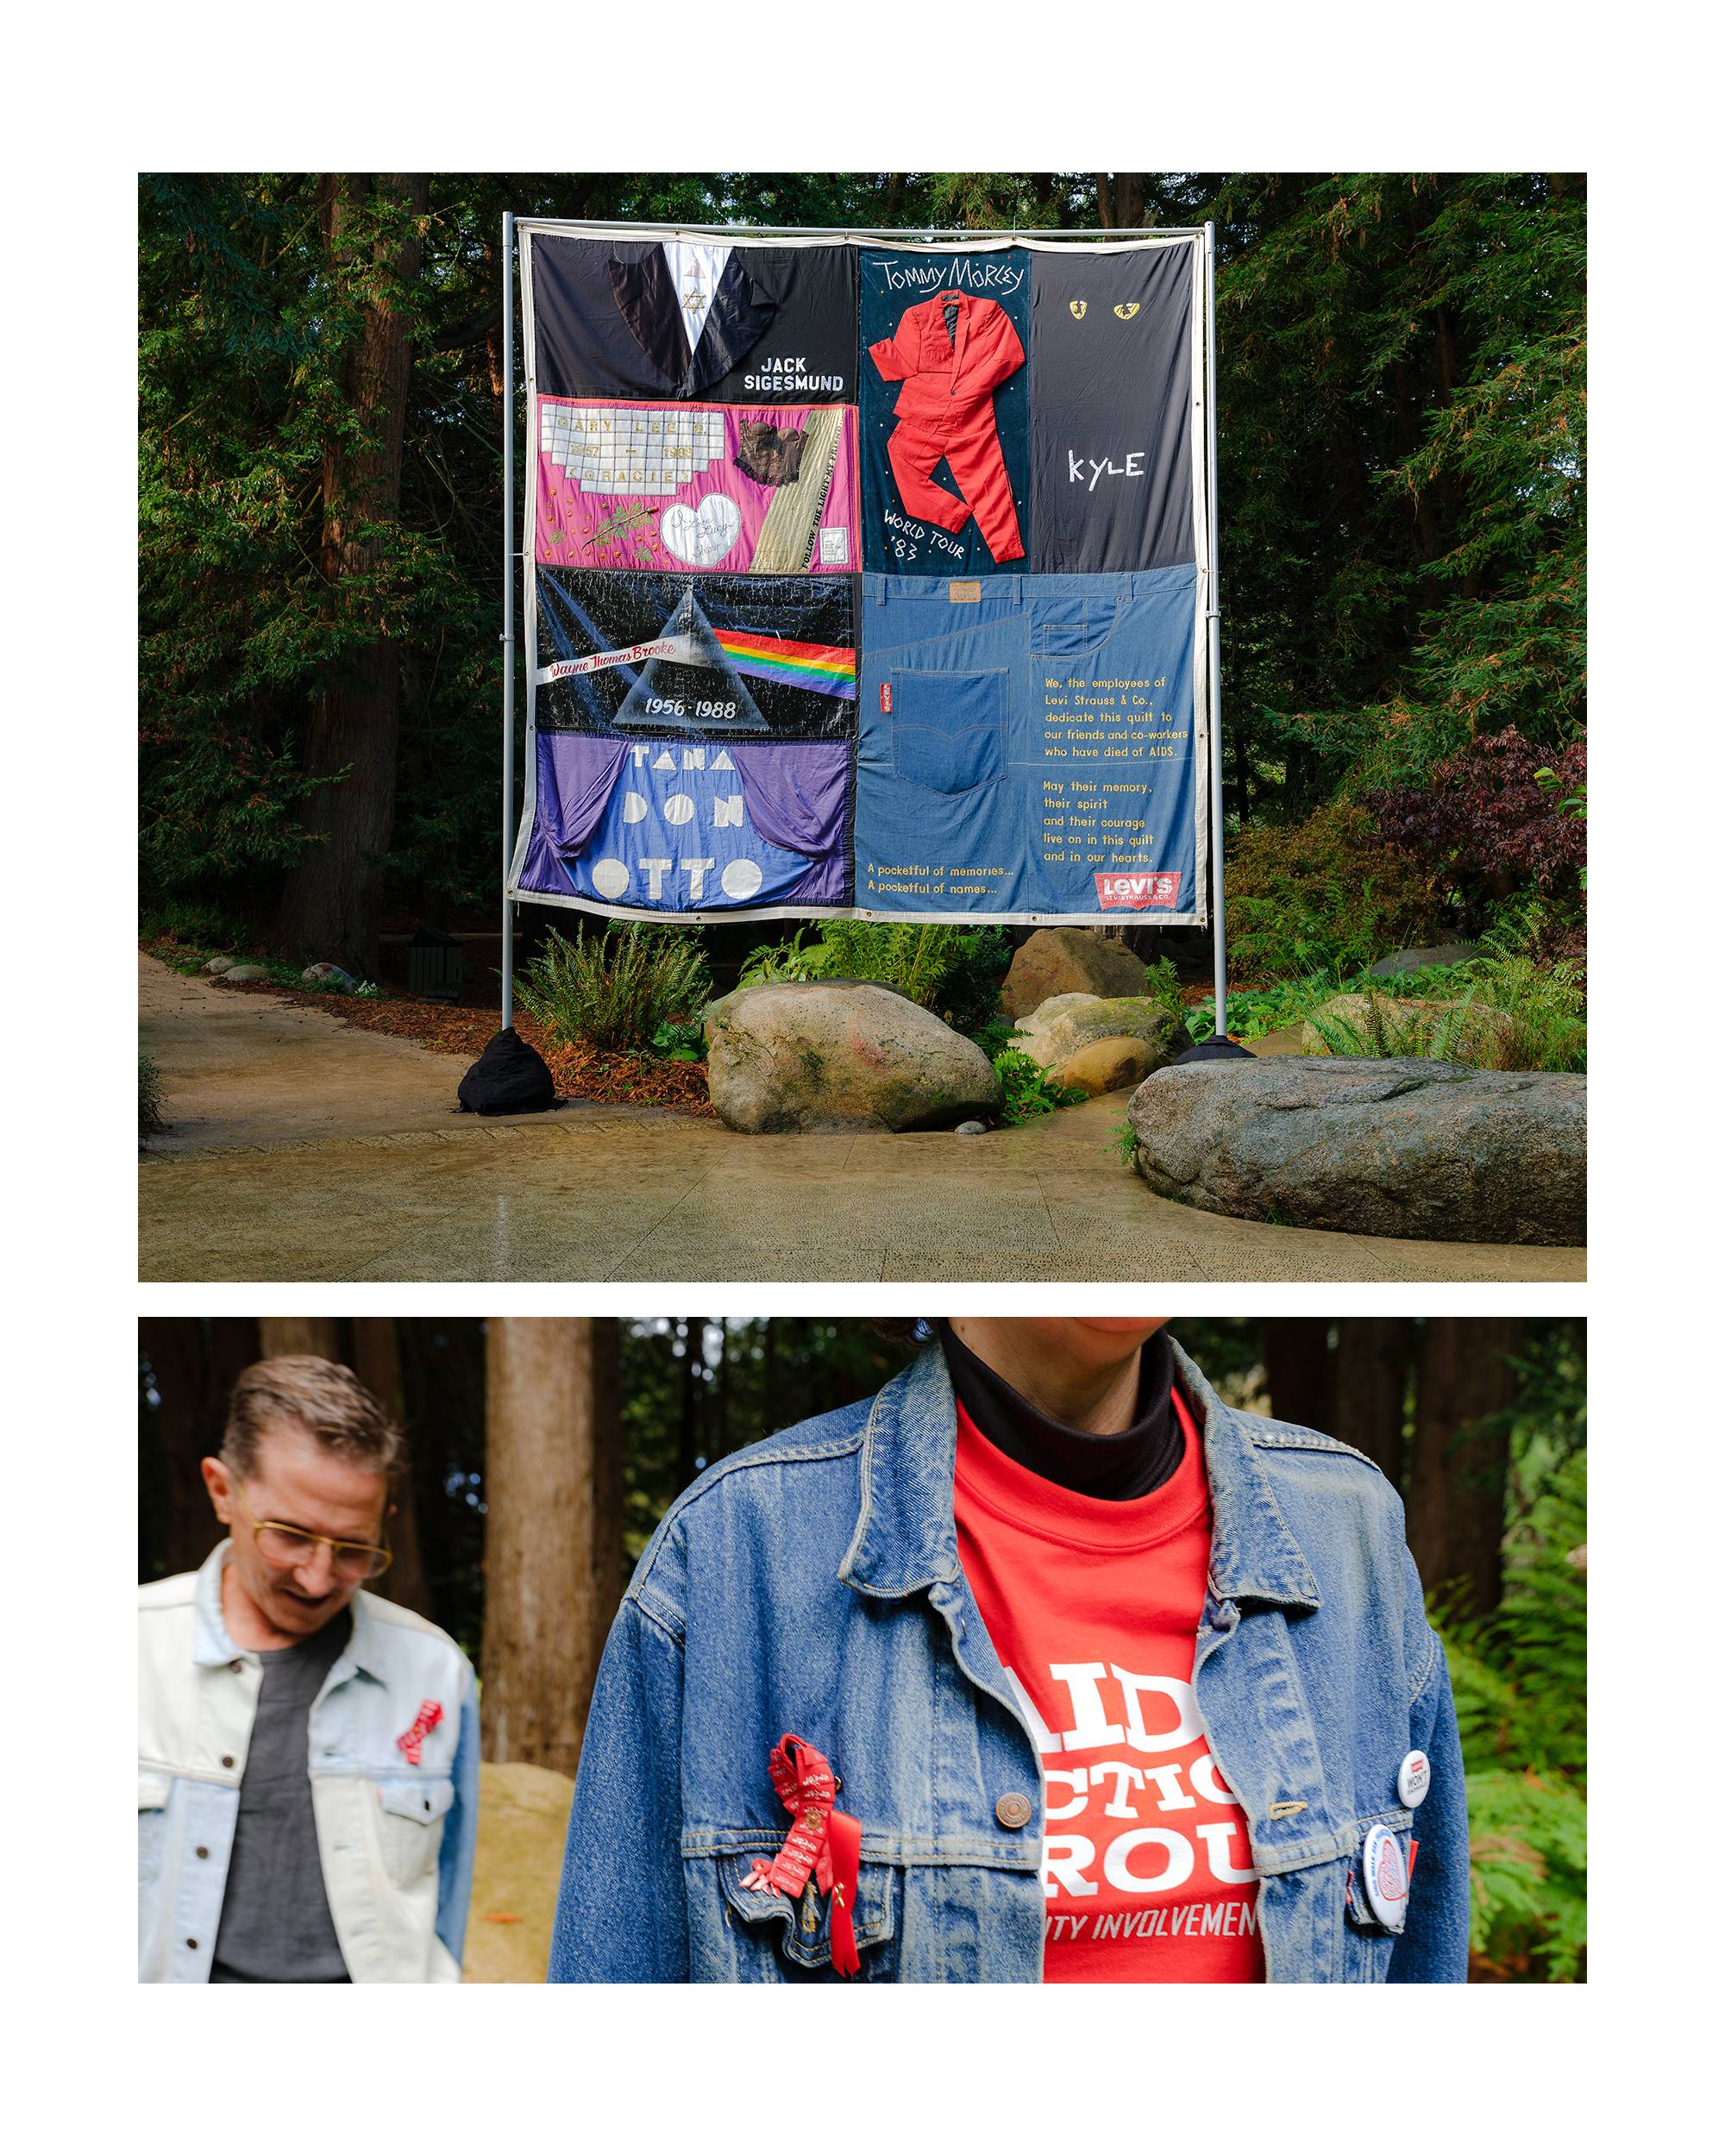 Sign of Aids blankets with a man wearing denim jacket with red pin.